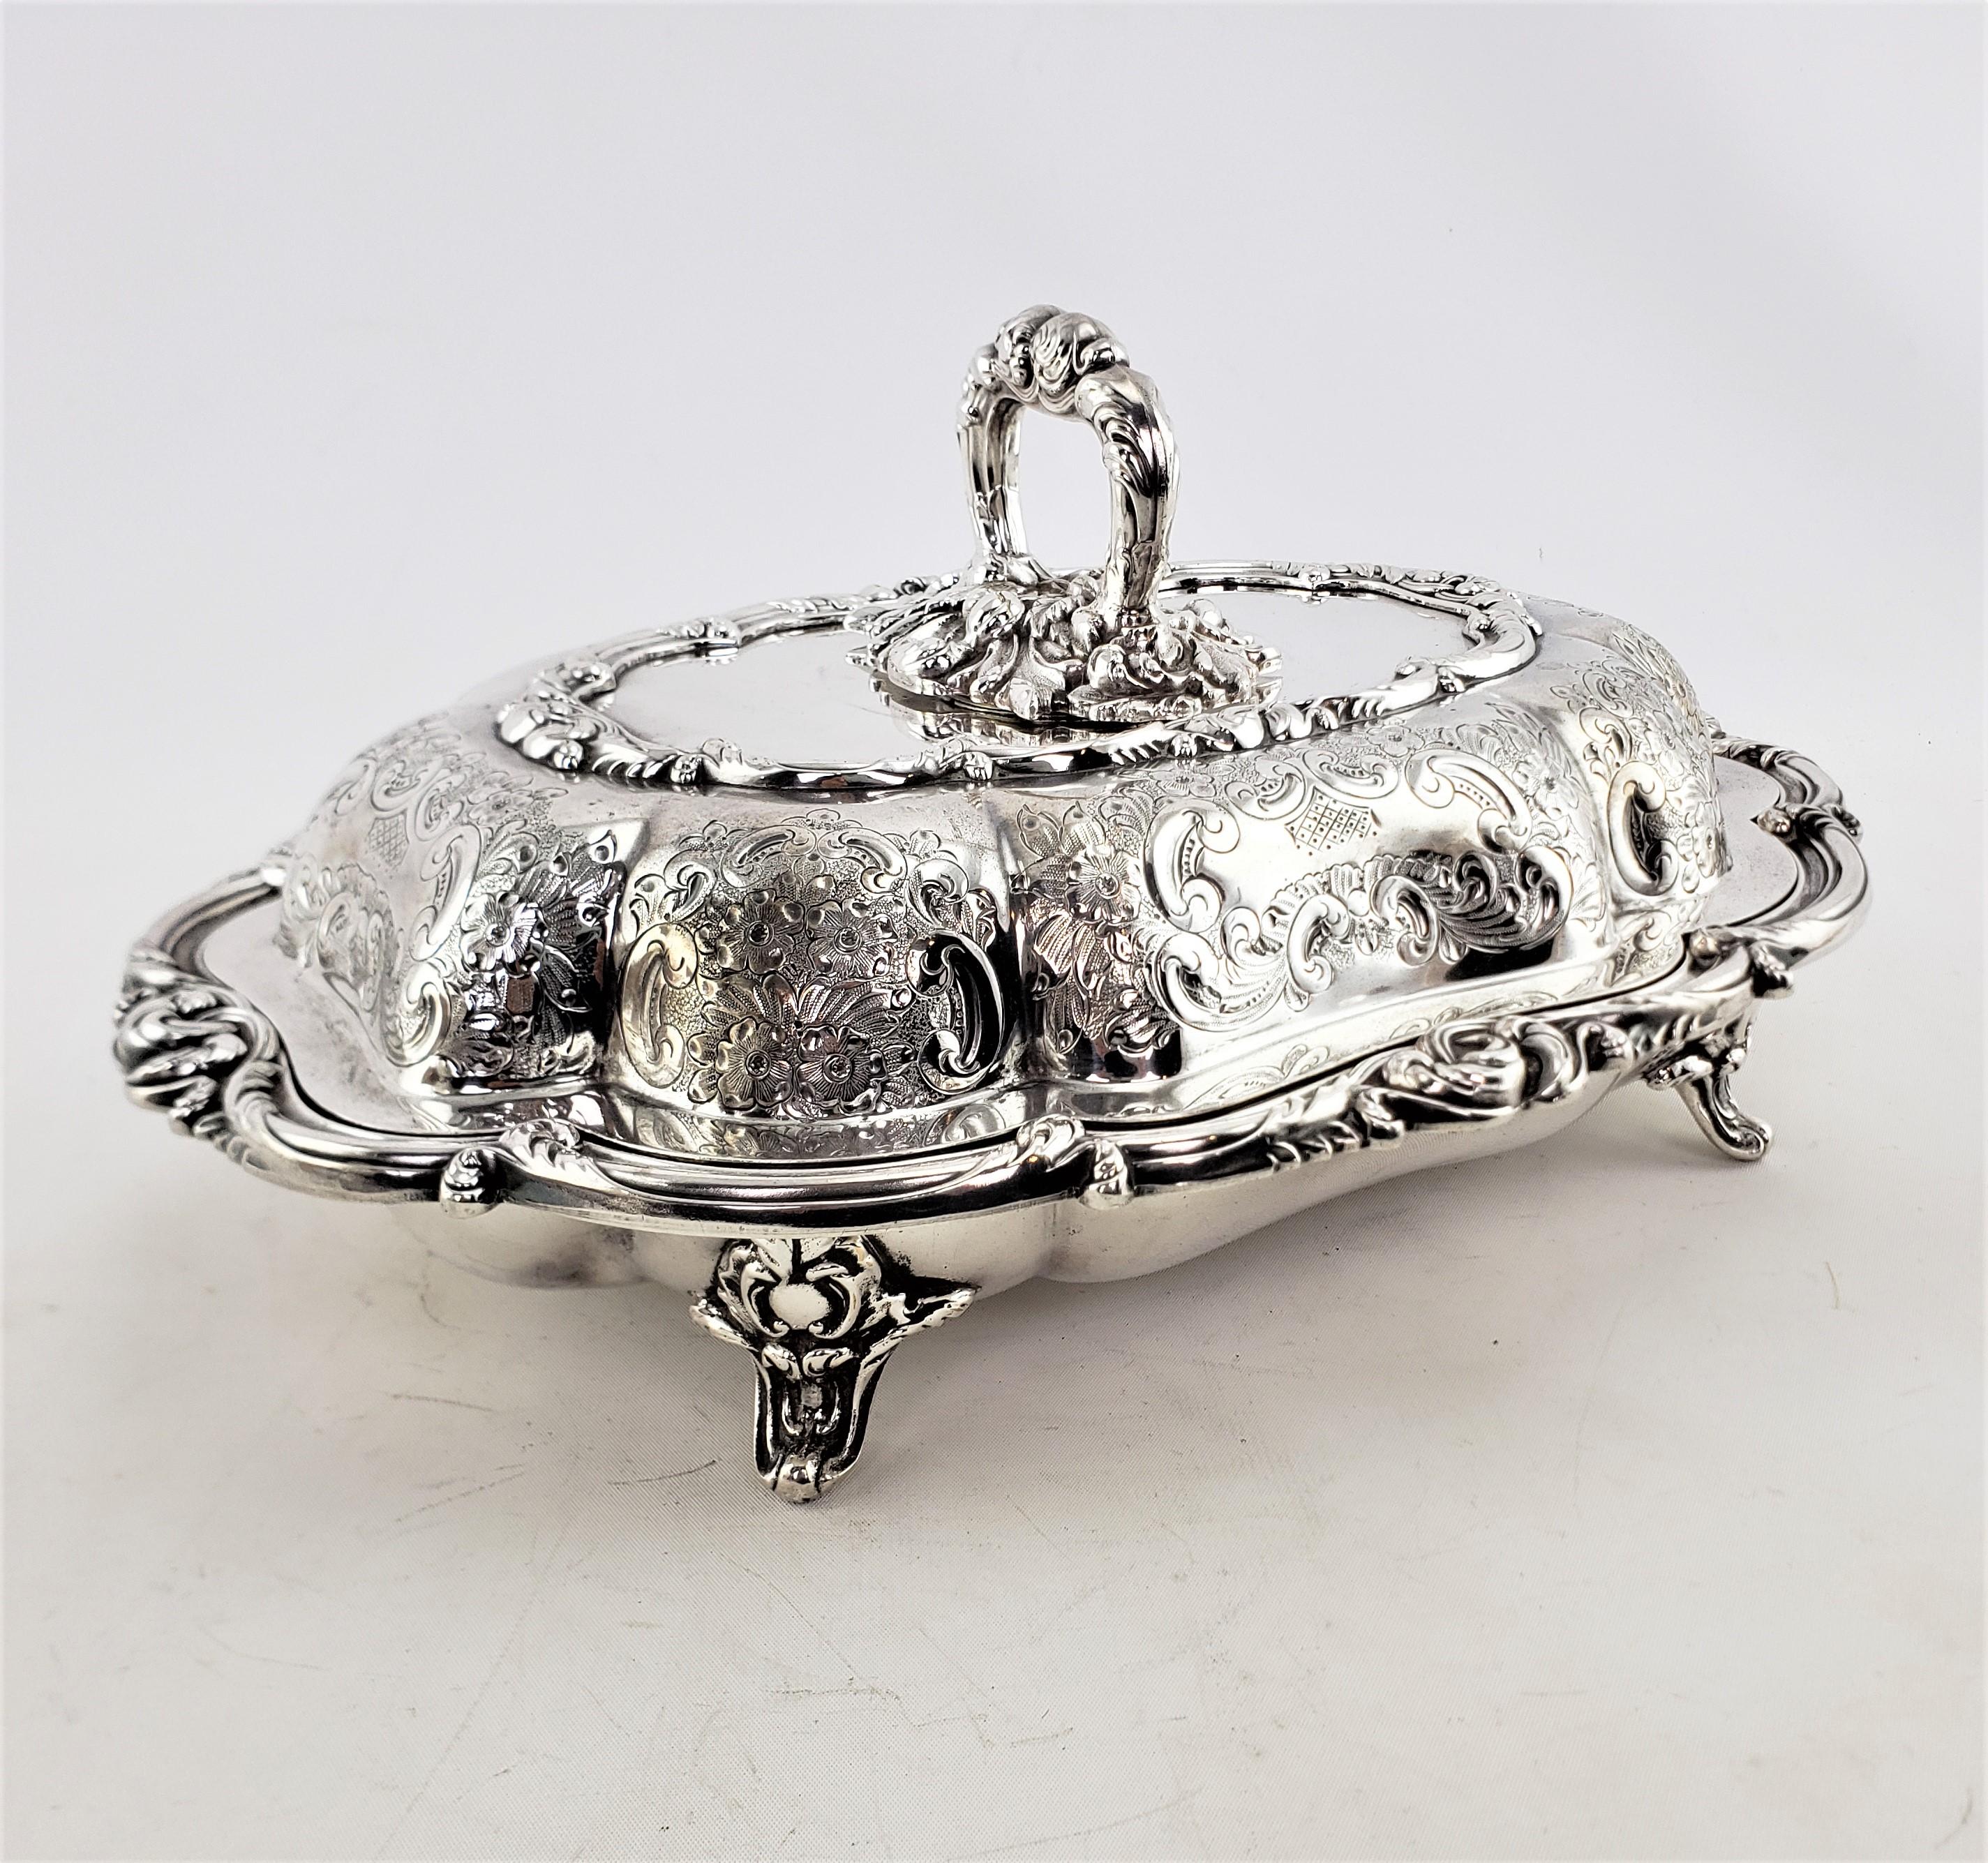 Antique Barker Bros. Silver Plated Covered Entree Server with Floral Decoration In Good Condition For Sale In Hamilton, Ontario